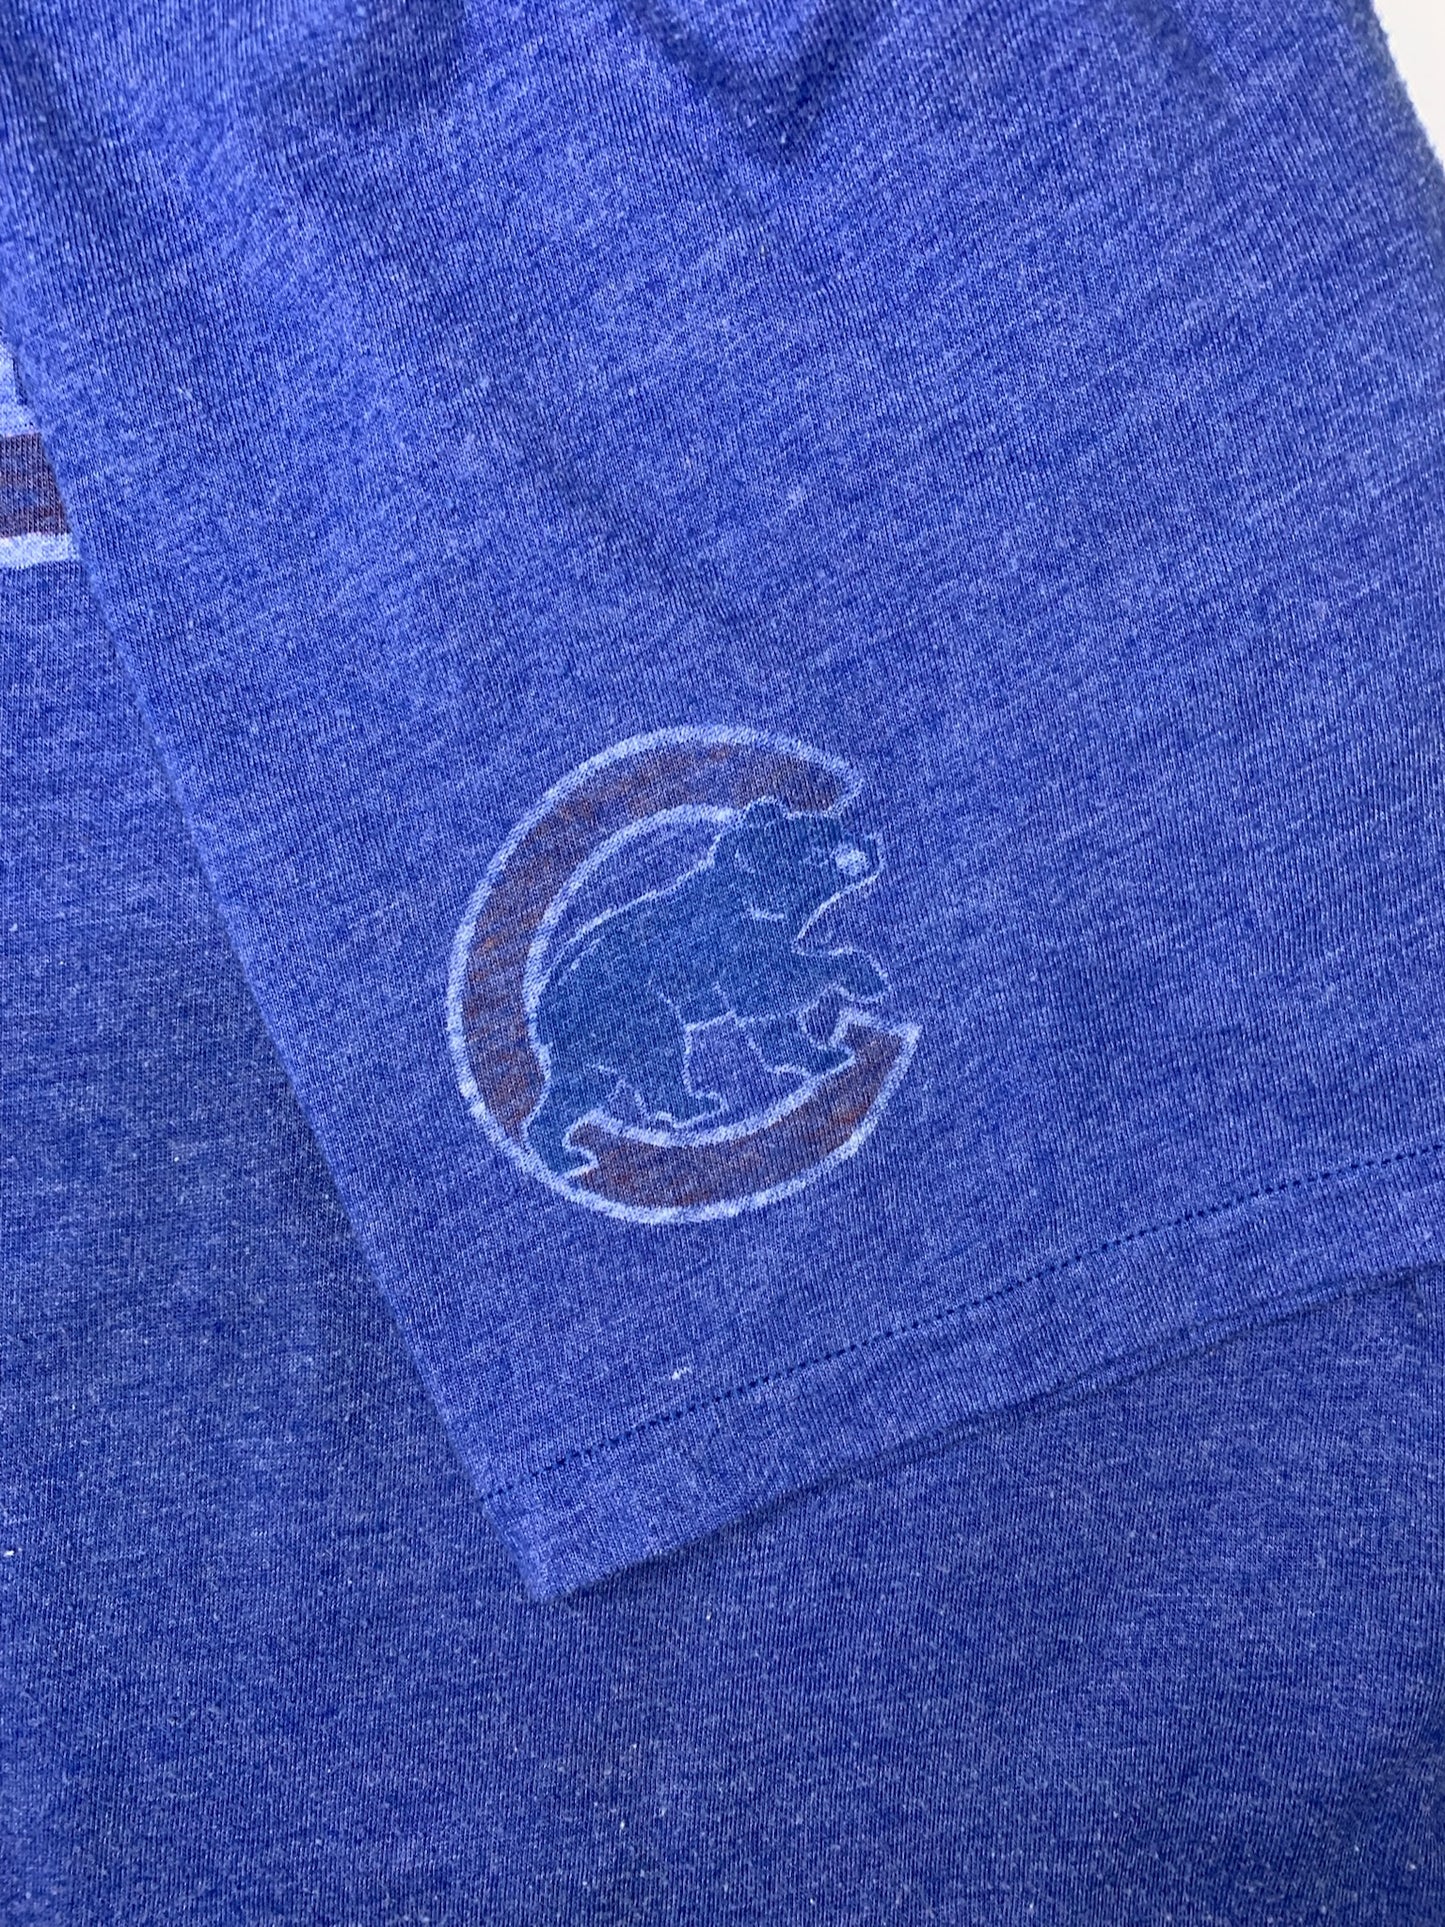 Chicago Cubs Nike Tee- L